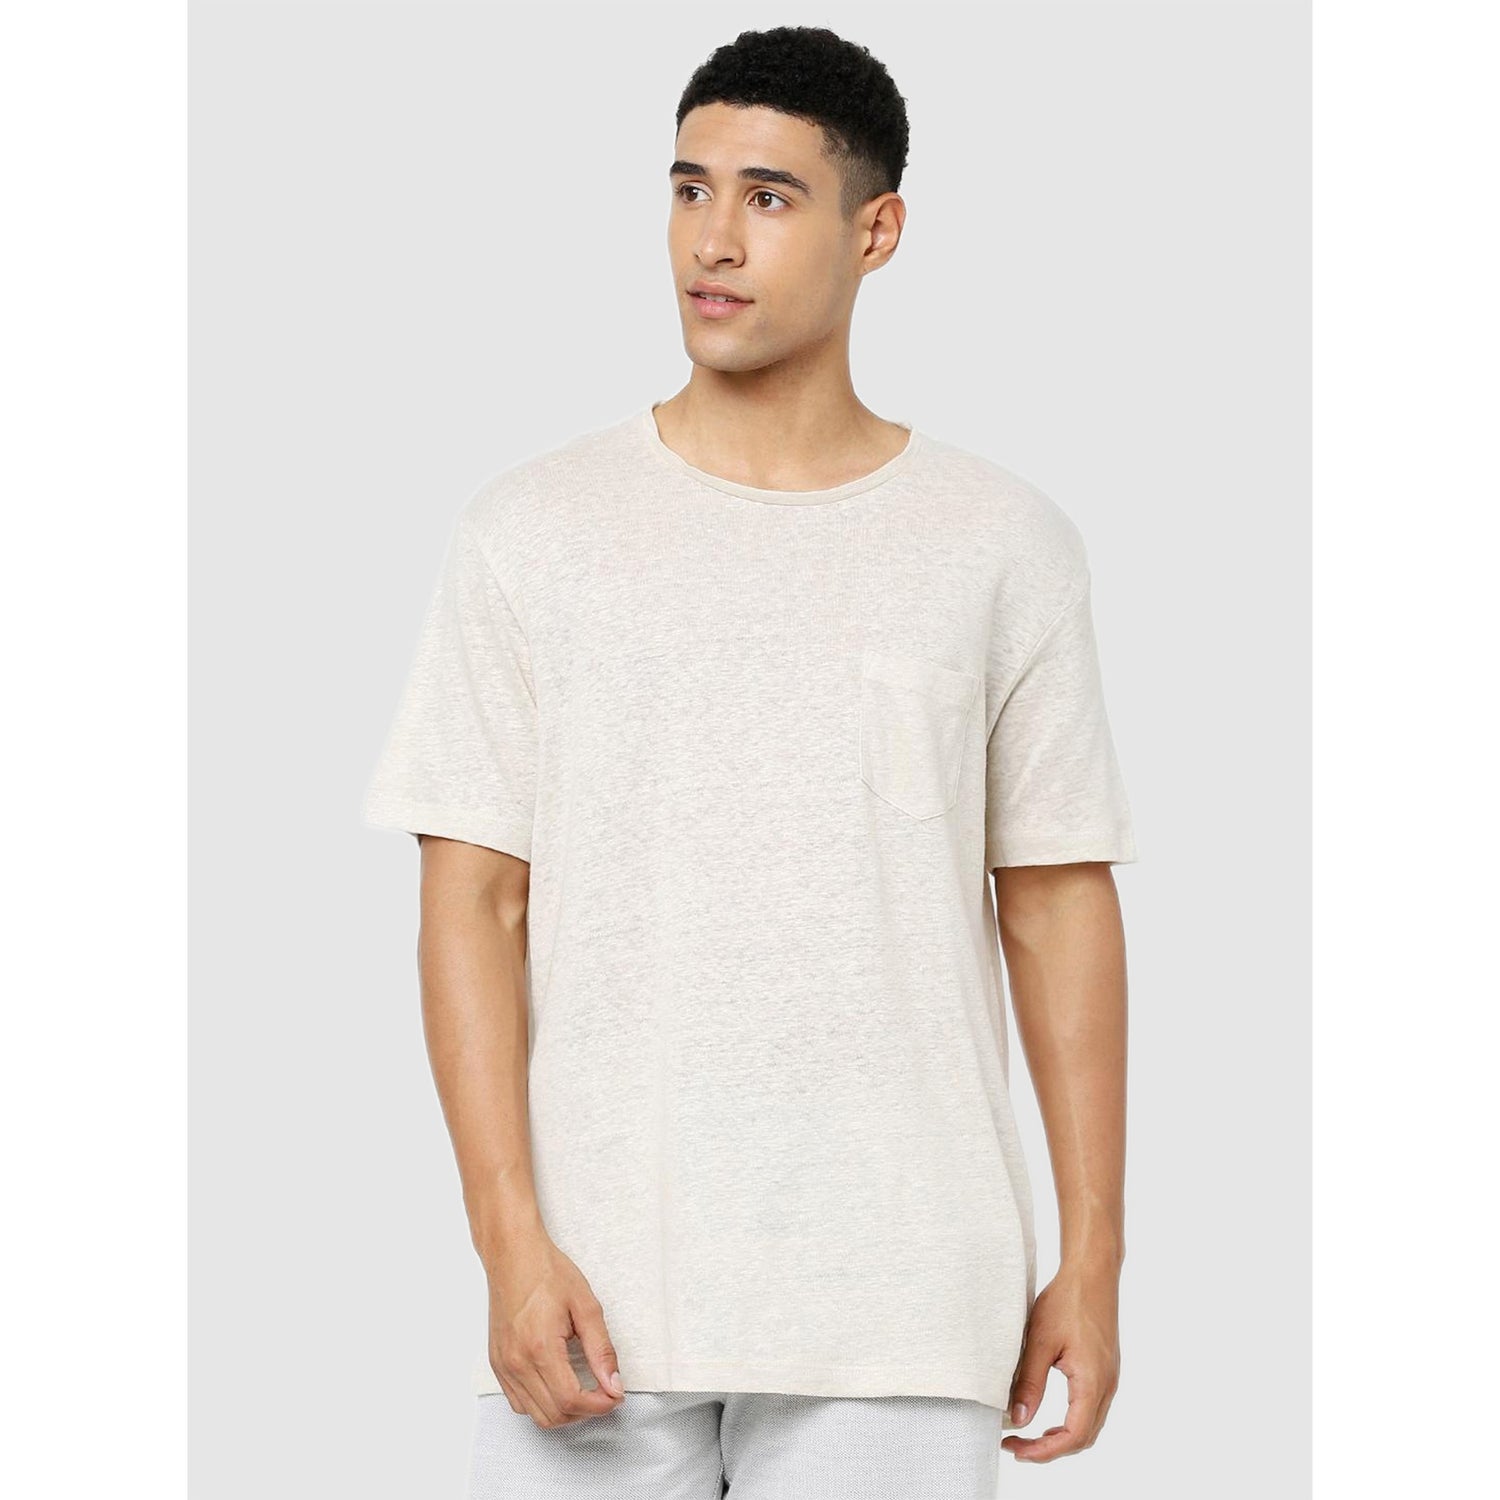 Off White Regular Fit Solid T-Shirt (Various Sizes)